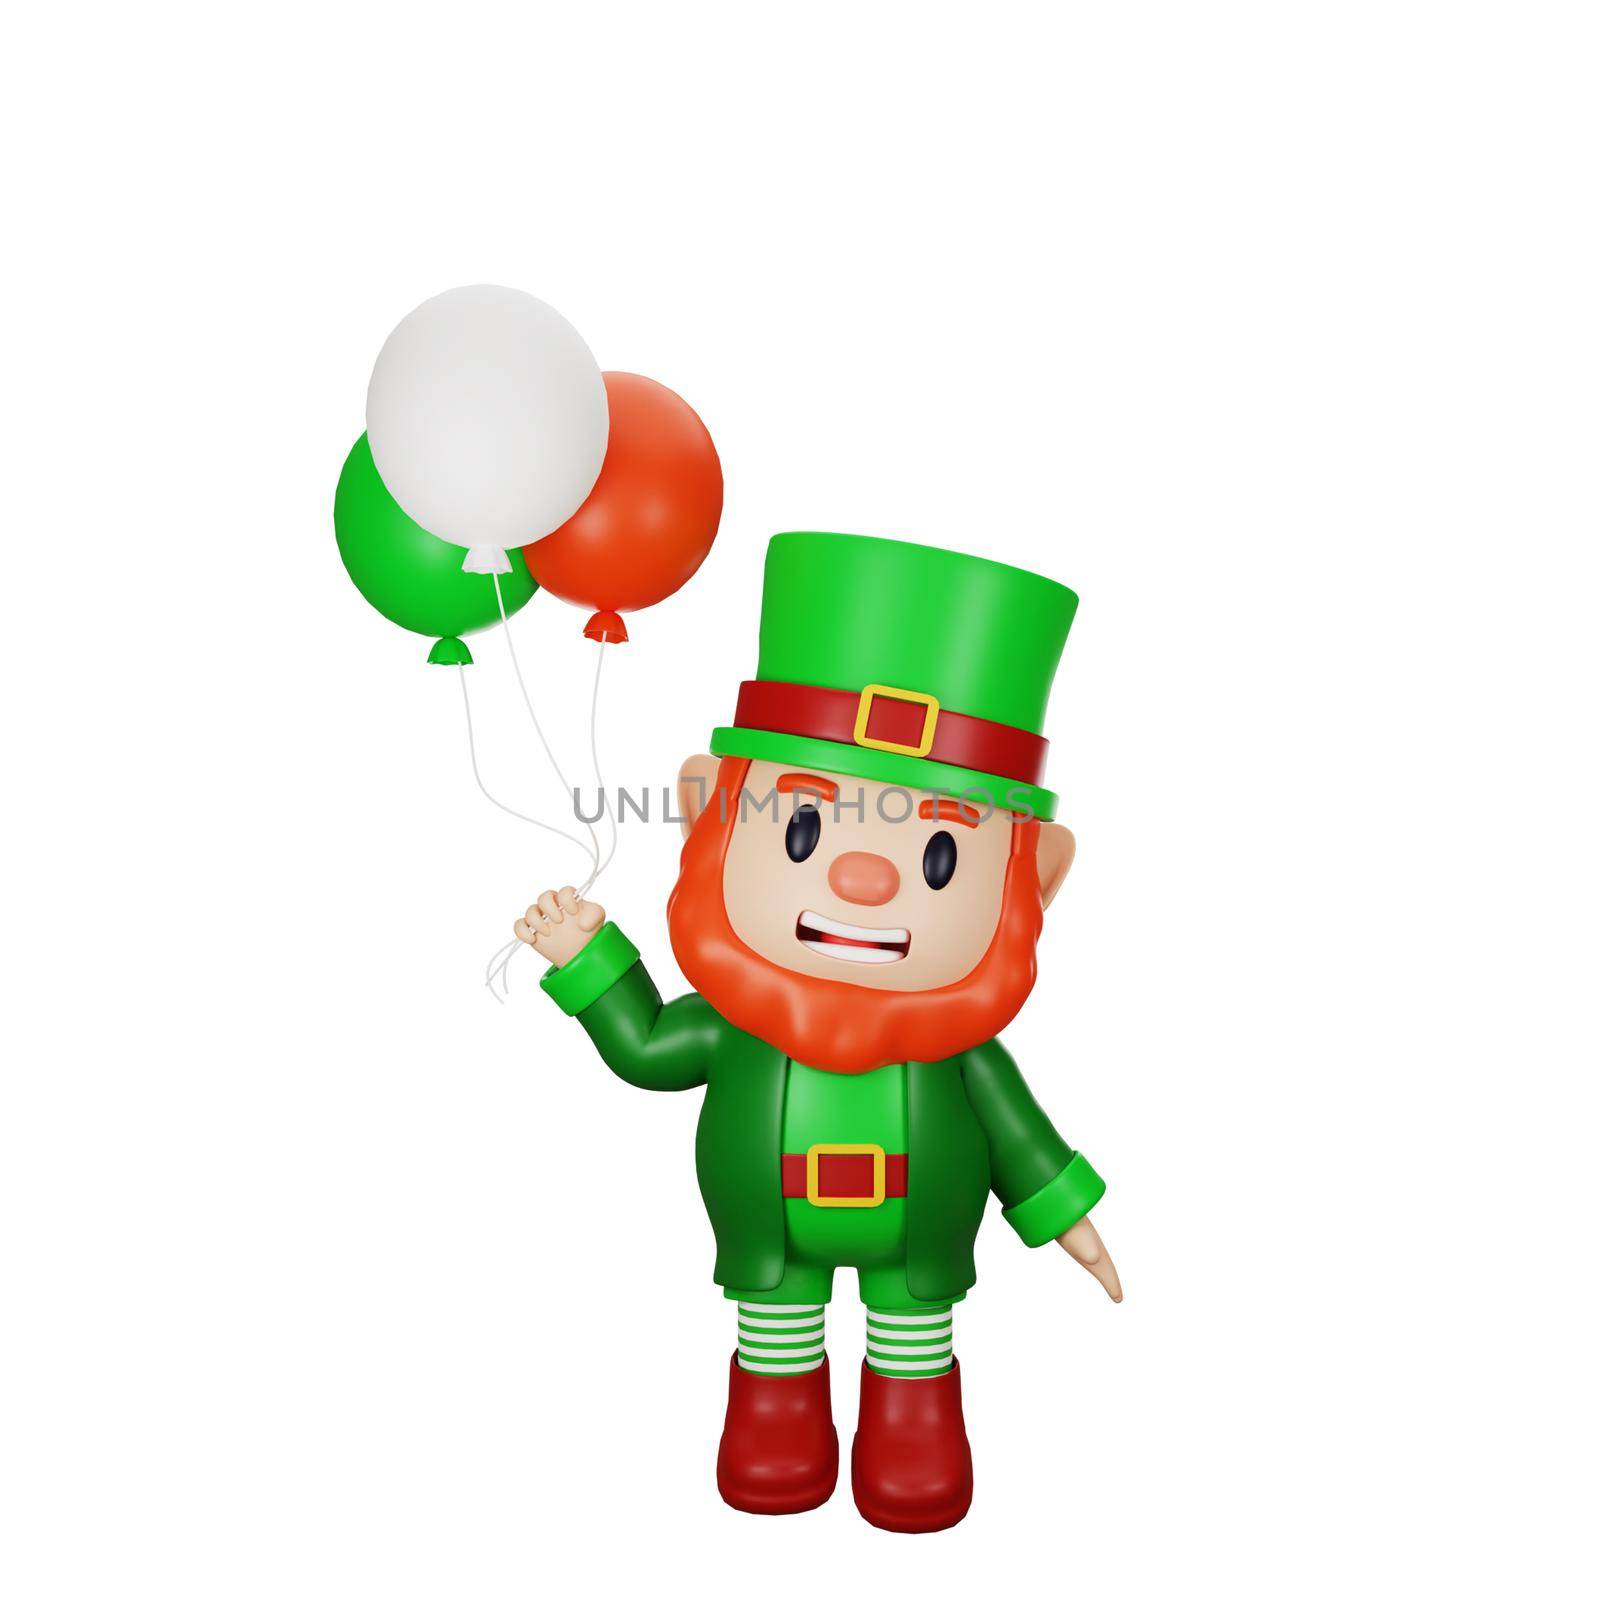 3d rendering of character st. patrick's day concept